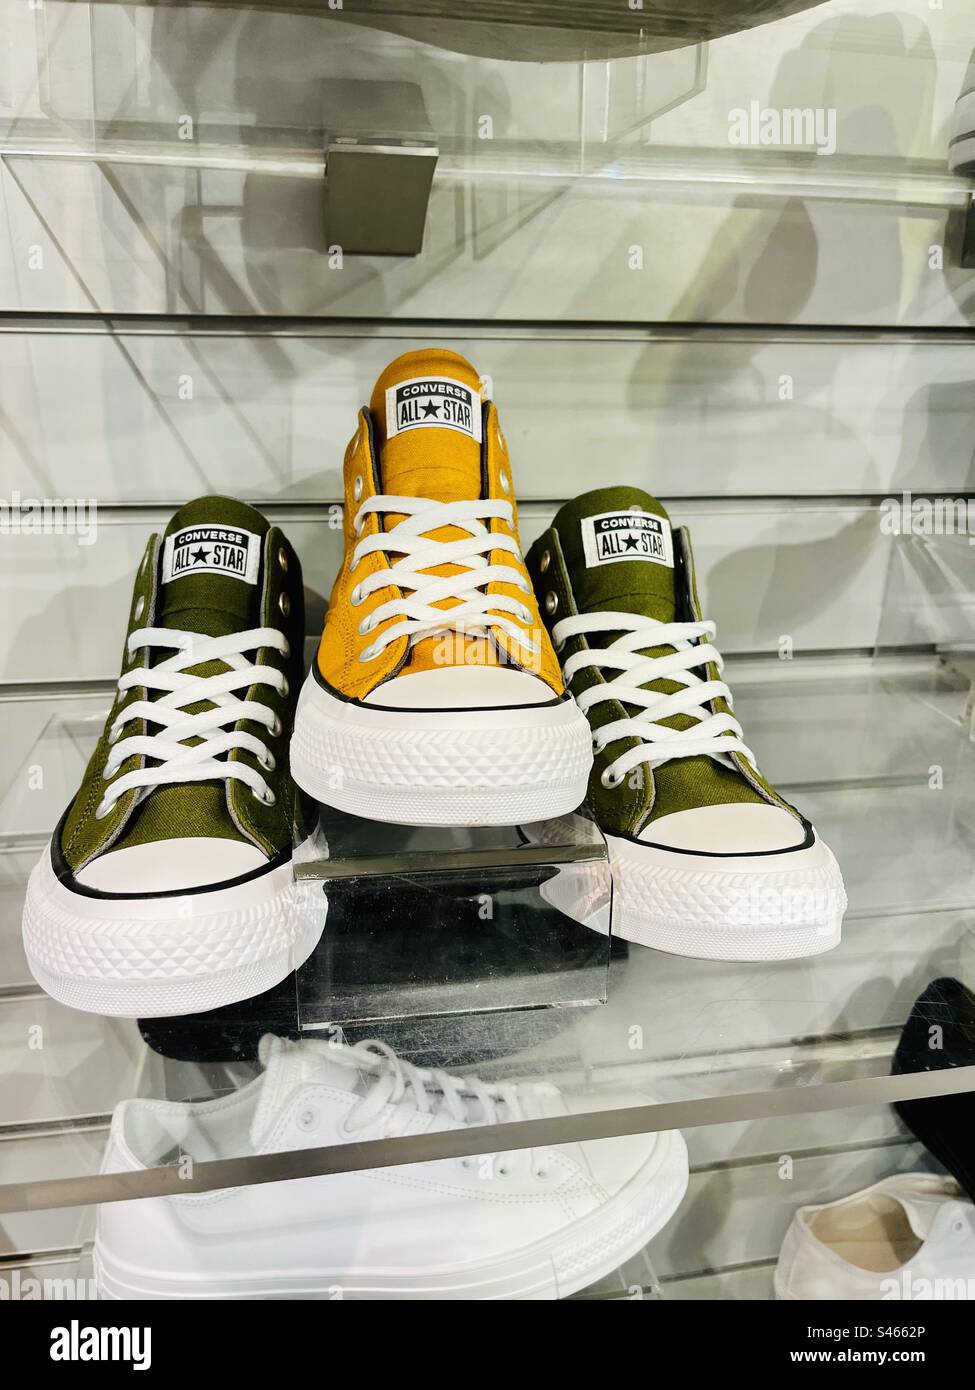 Converse Trainers in a shop Stock Photo